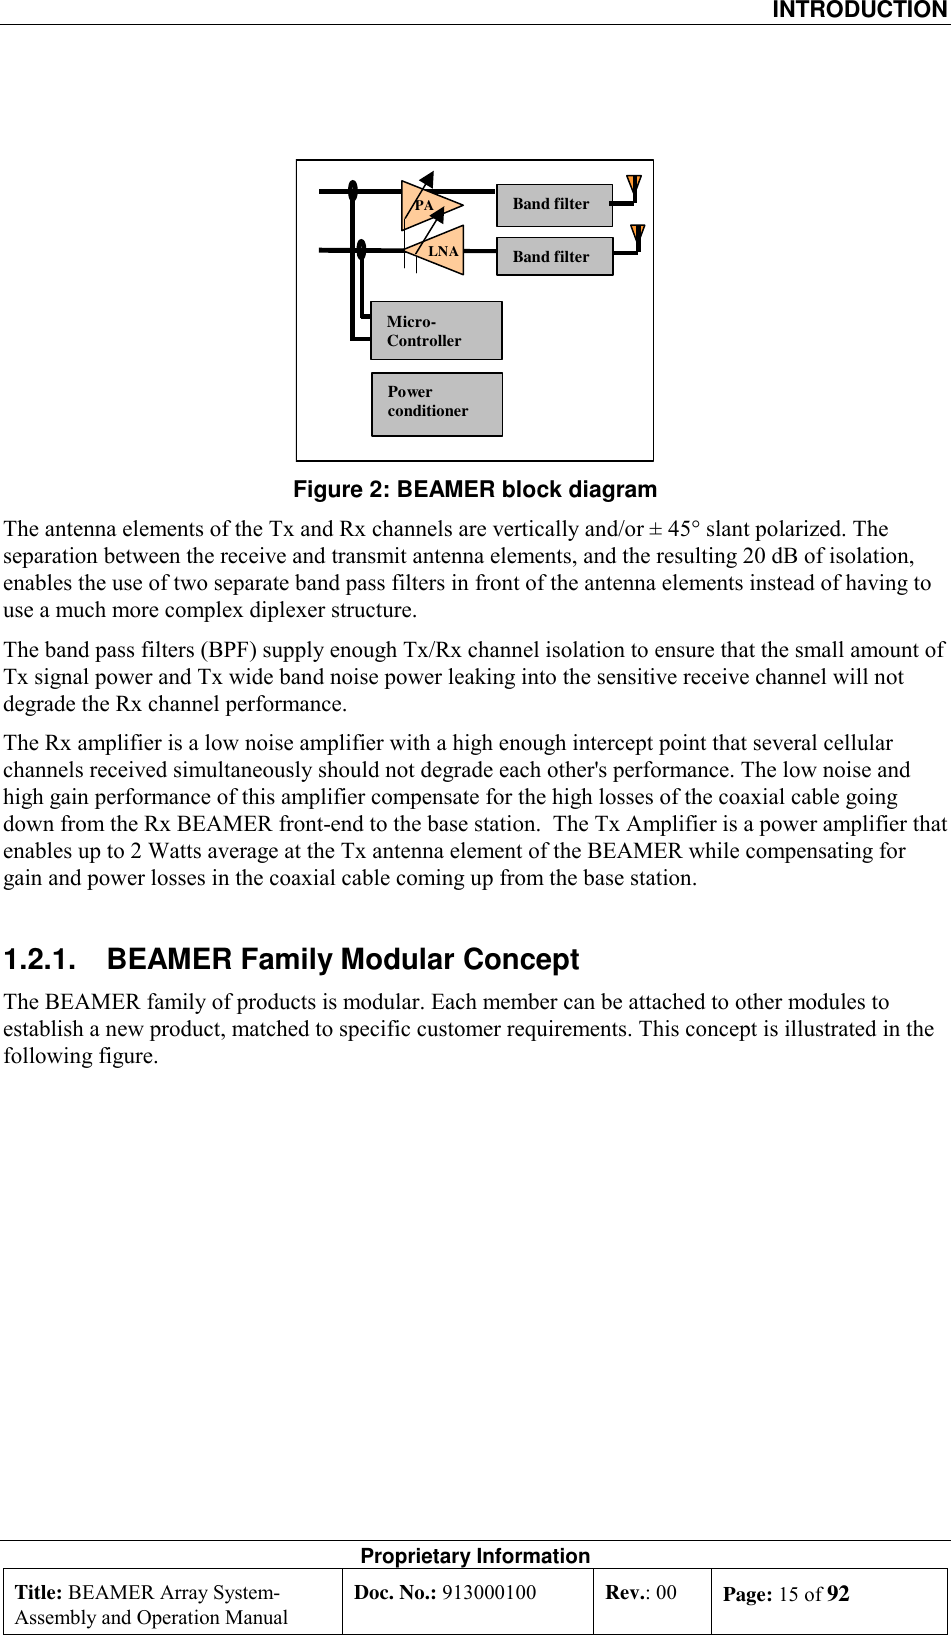  INTRODUCTION Proprietary Information Title: BEAMER Array System- Assembly and Operation Manual Doc. No.: 913000100  Rev.: 00  Page: 15 of 92   Band filterBand filterMicro-ControllerPowerconditionerPALNA Figure 2: BEAMER block diagram The antenna elements of the Tx and Rx channels are vertically and/or ± 45° slant polarized. The separation between the receive and transmit antenna elements, and the resulting 20 dB of isolation, enables the use of two separate band pass filters in front of the antenna elements instead of having to use a much more complex diplexer structure. The band pass filters (BPF) supply enough Tx/Rx channel isolation to ensure that the small amount of Tx signal power and Tx wide band noise power leaking into the sensitive receive channel will not degrade the Rx channel performance. The Rx amplifier is a low noise amplifier with a high enough intercept point that several cellular channels received simultaneously should not degrade each other&apos;s performance. The low noise and high gain performance of this amplifier compensate for the high losses of the coaxial cable going down from the Rx BEAMER front-end to the base station.  The Tx Amplifier is a power amplifier that enables up to 2 Watts average at the Tx antenna element of the BEAMER while compensating for gain and power losses in the coaxial cable coming up from the base station. 1.2.1.  BEAMER Family Modular Concept The BEAMER family of products is modular. Each member can be attached to other modules to establish a new product, matched to specific customer requirements. This concept is illustrated in the following figure. 